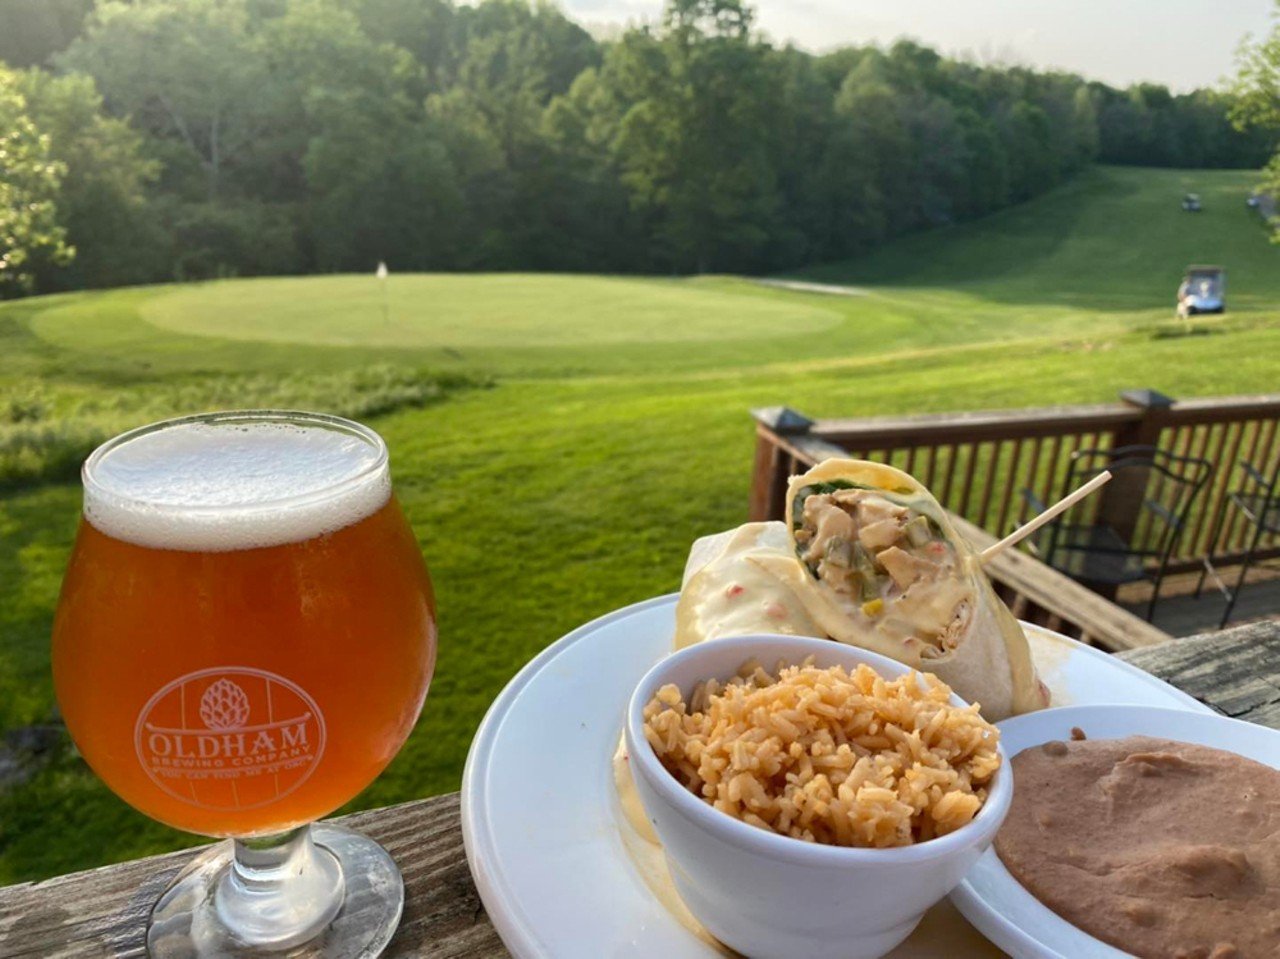  Oldham Brewing Co.
10601 Worthington Lane
The patio at this microbrewery overlooks the golf course of a country club, so the views are much swankier than those at most other bars. Beyond that, it&#146;s also the first of its kind in Prospect and second in Oldham County. 
Photo via Facebook.com/OldhamBrewingCo